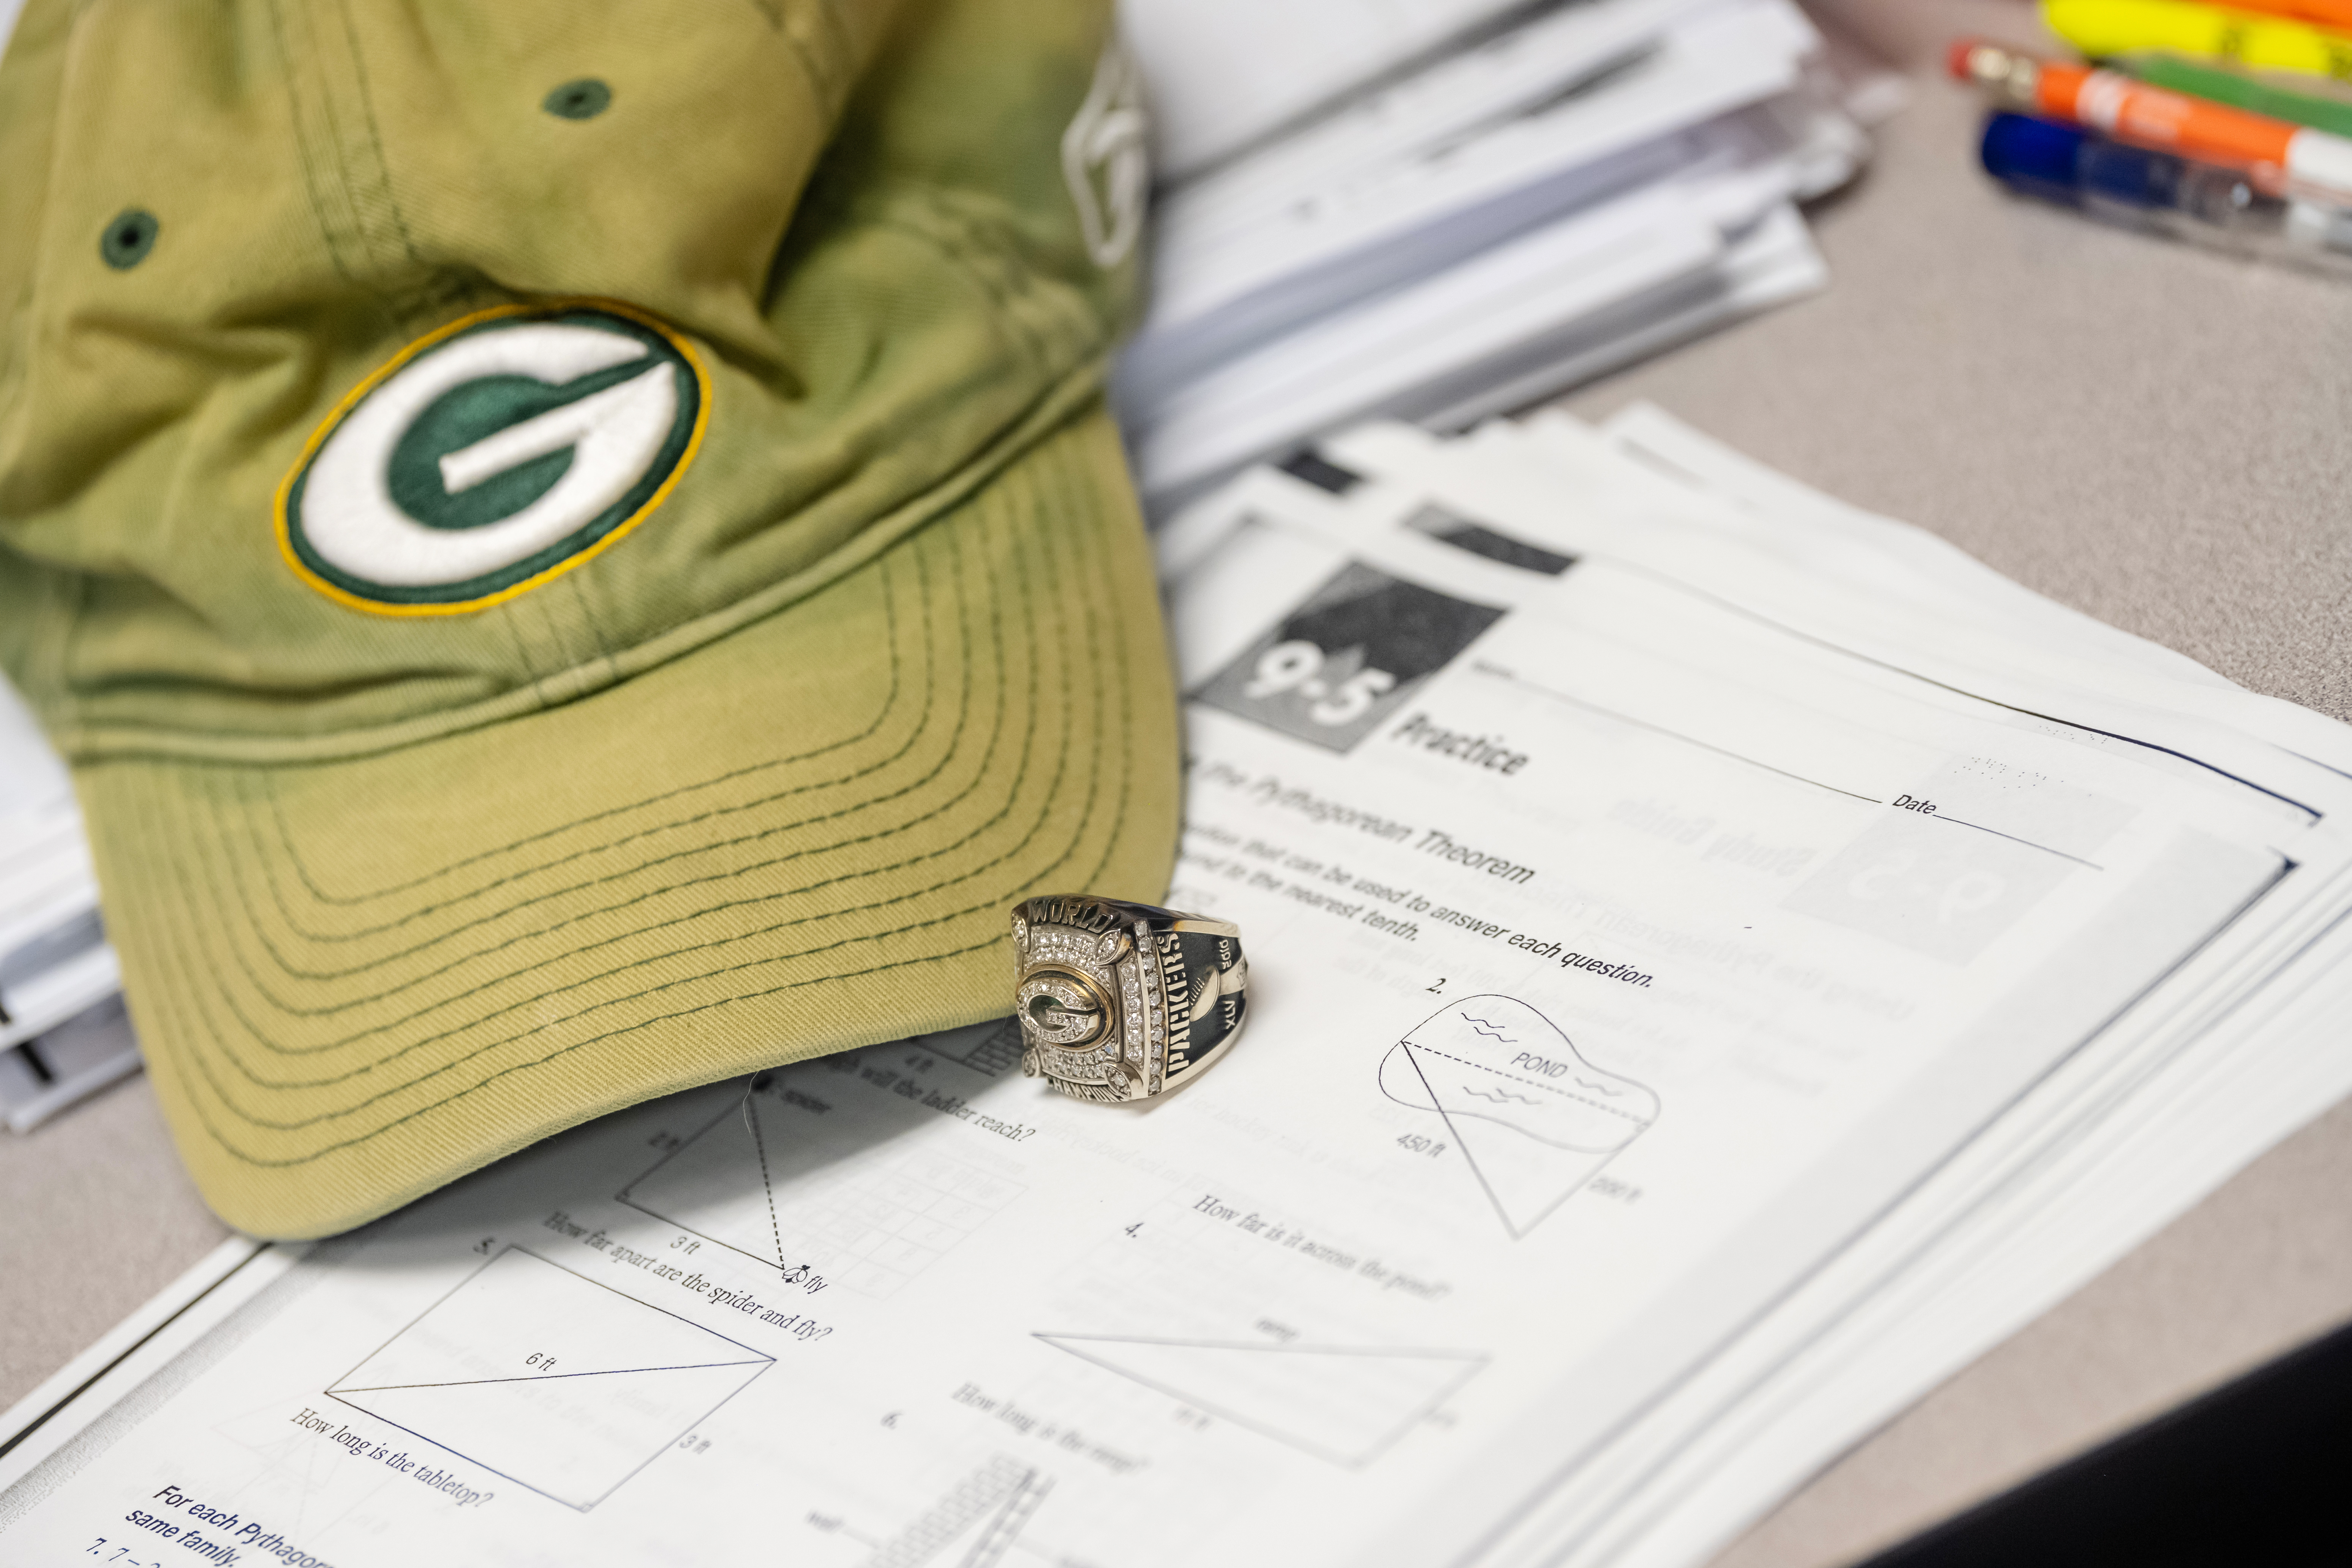 Malc's Packers hat and Super Bowl XLV ring lay on his desk, on top of geometry worksheets.